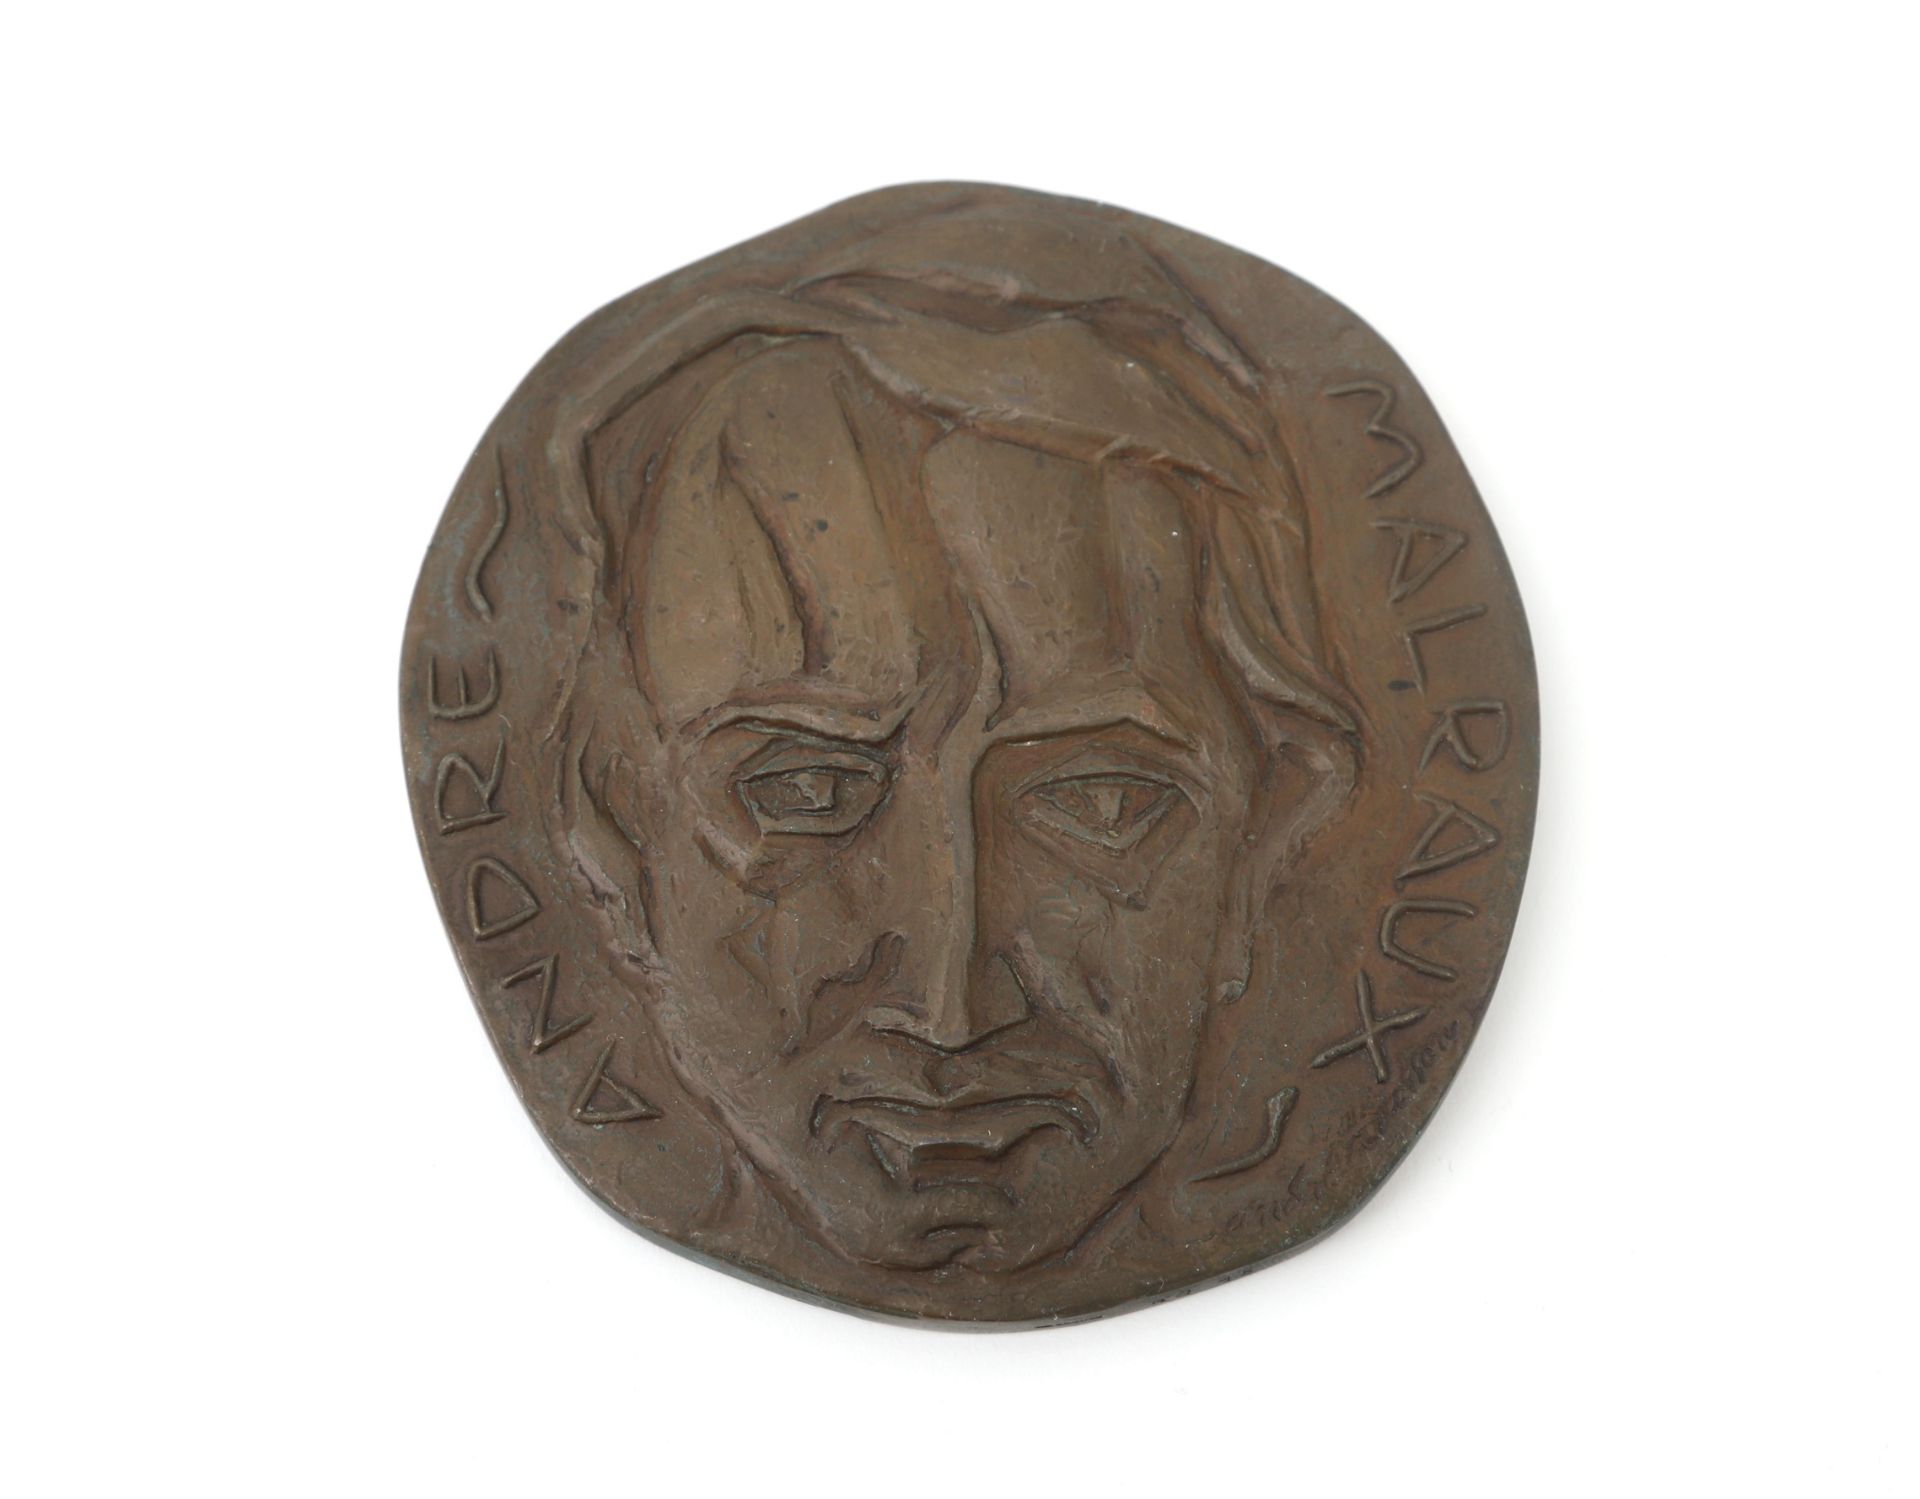 André Masson (1896-1987) A bronze commemorative coin 'Andre Malraux', not dated, marked: André